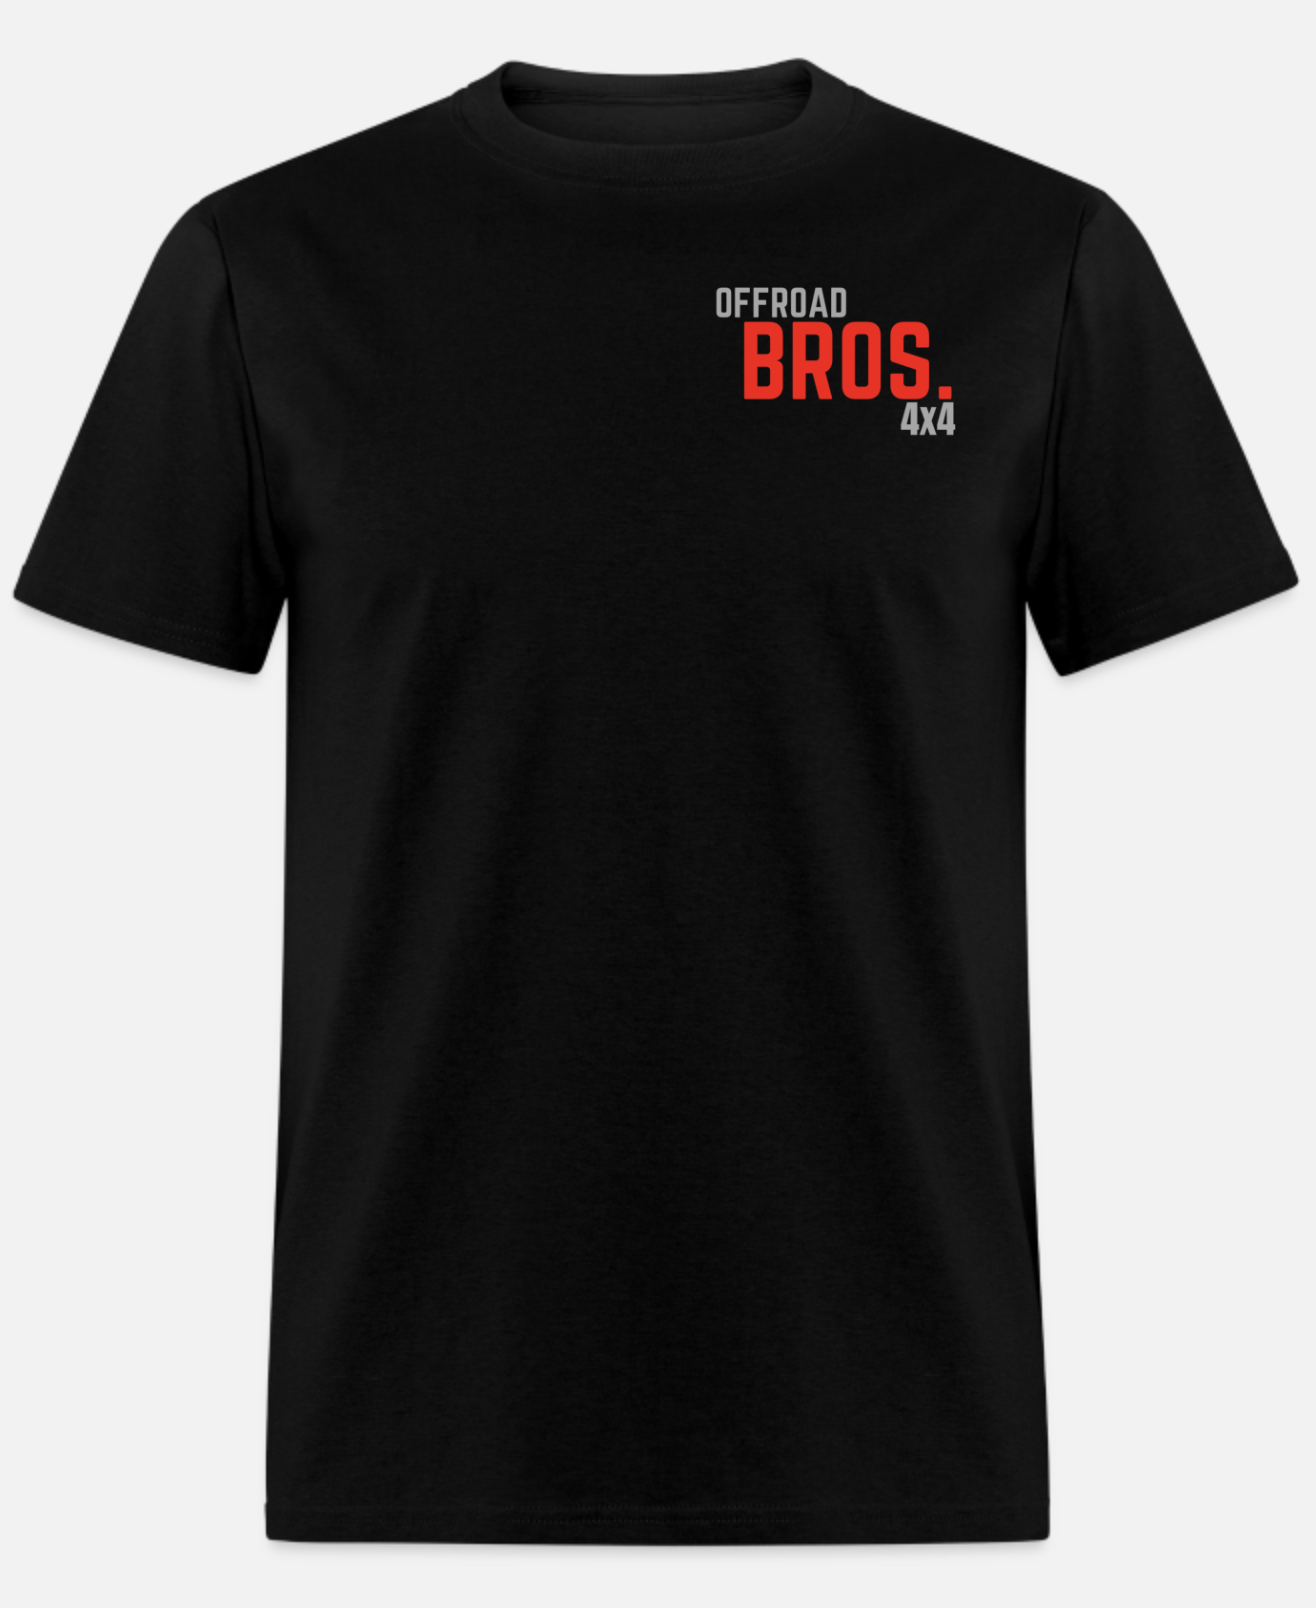 BLACK T-SHIRT BY OFFROAD BROS. 4X4